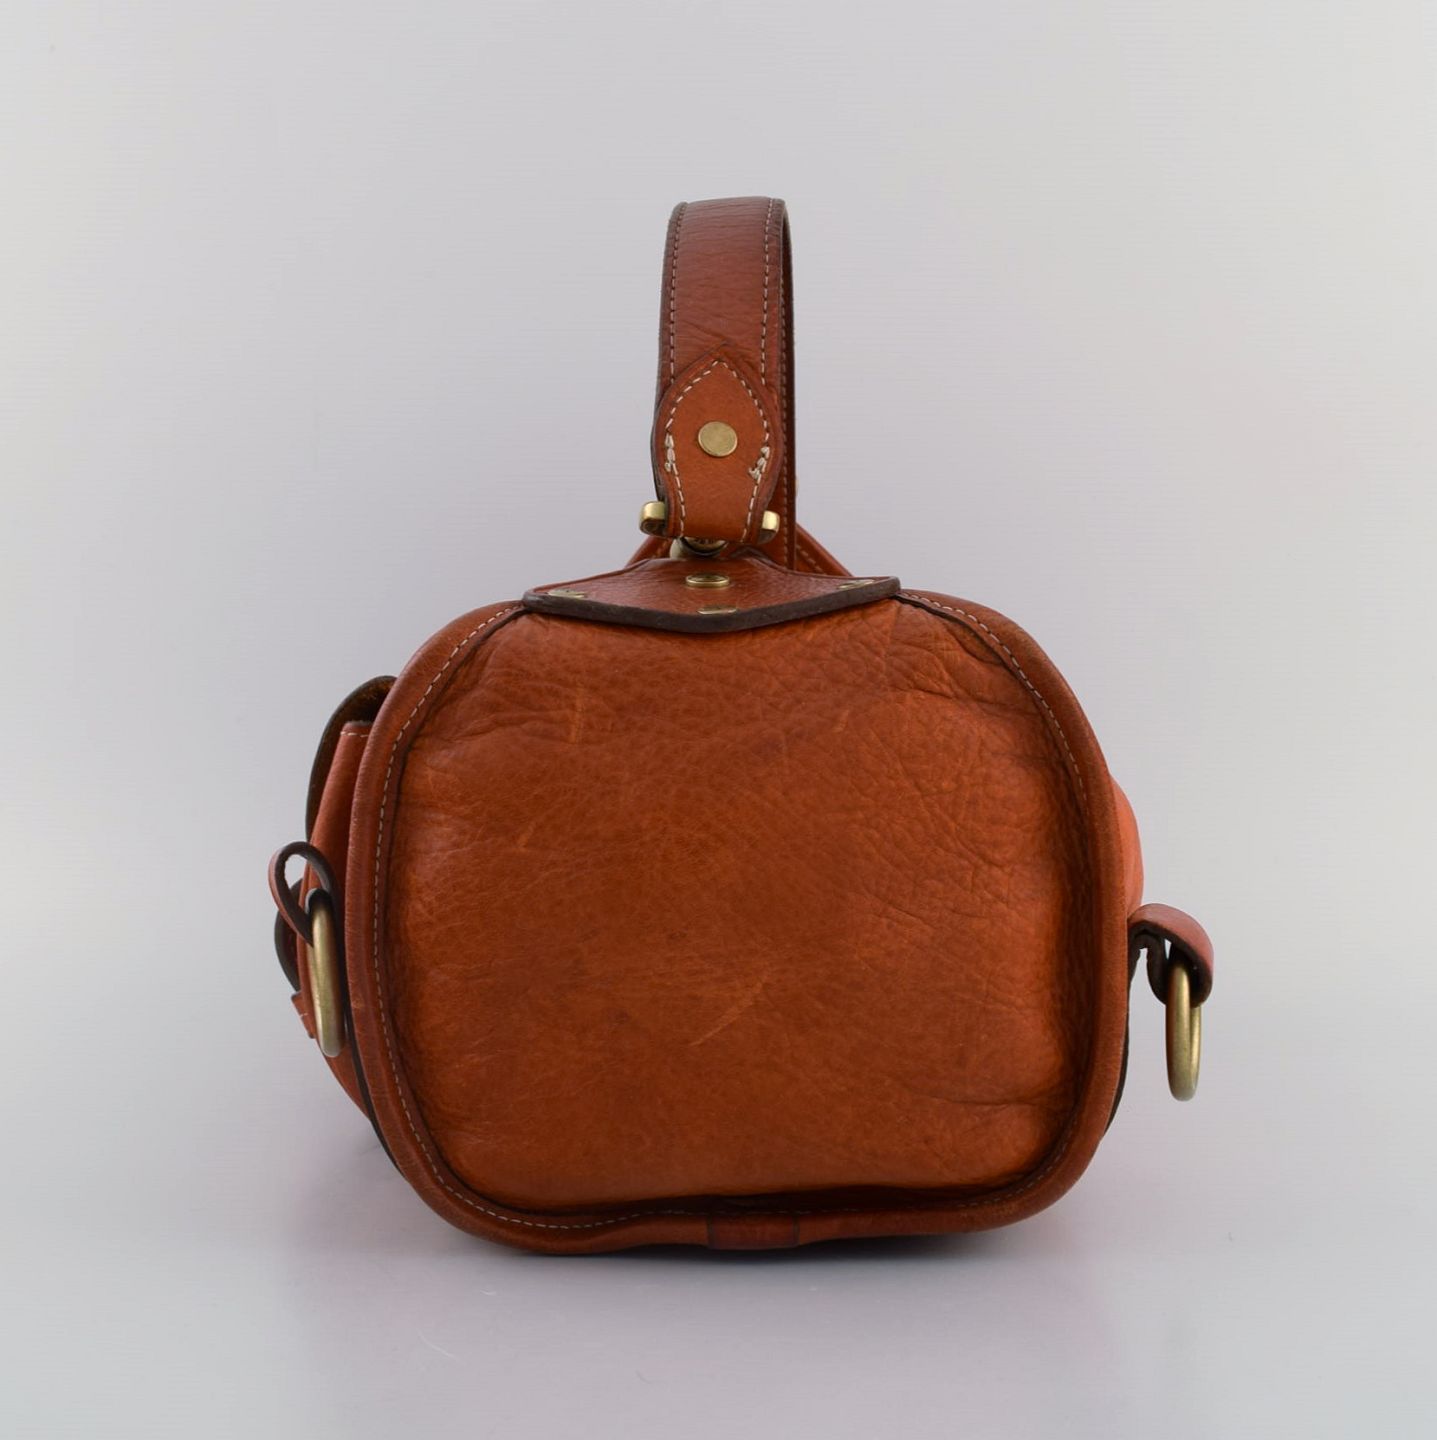  Vintage Mulberry handbag in core leather with brass  clasps and buckles. 1980s. *